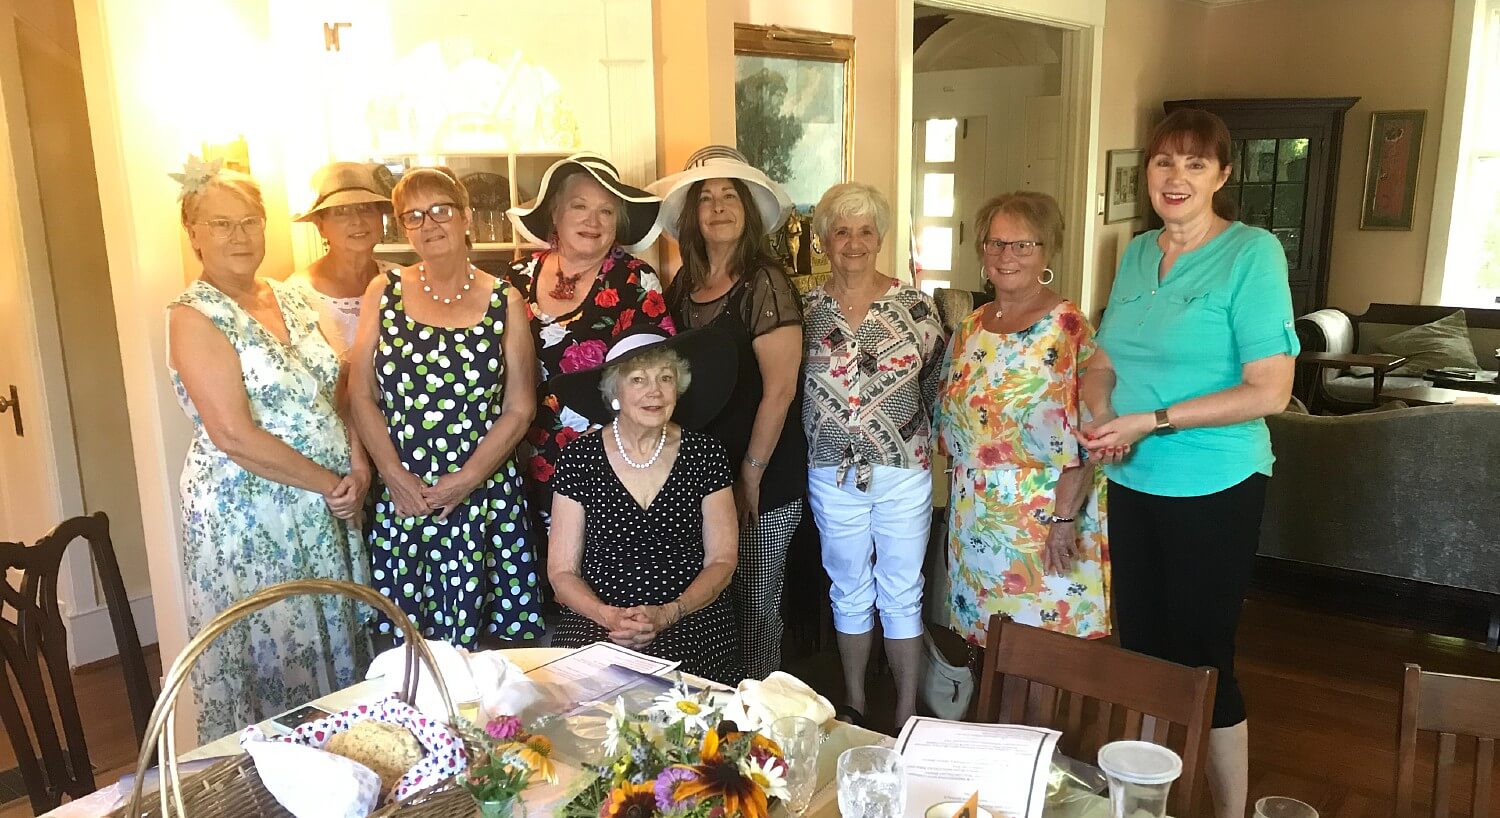 A group of nine ladies, some wearing hats, gathered for a picture at a special event in a home